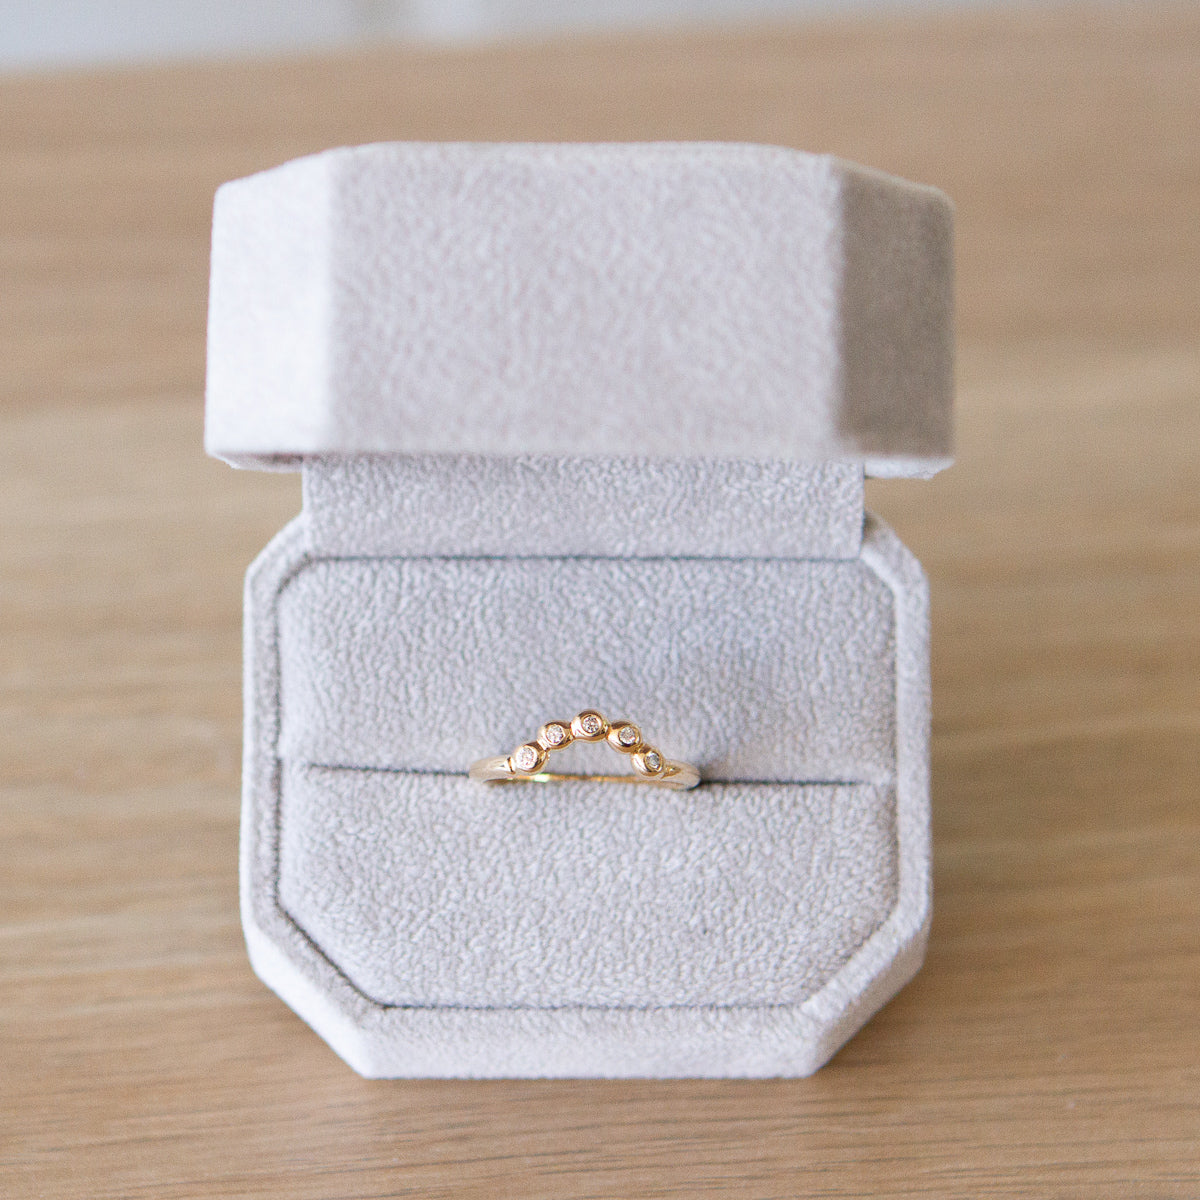 Medium Arched Droplet Band Yellow Gold with White Diamonds in a ring box by Corey Egan